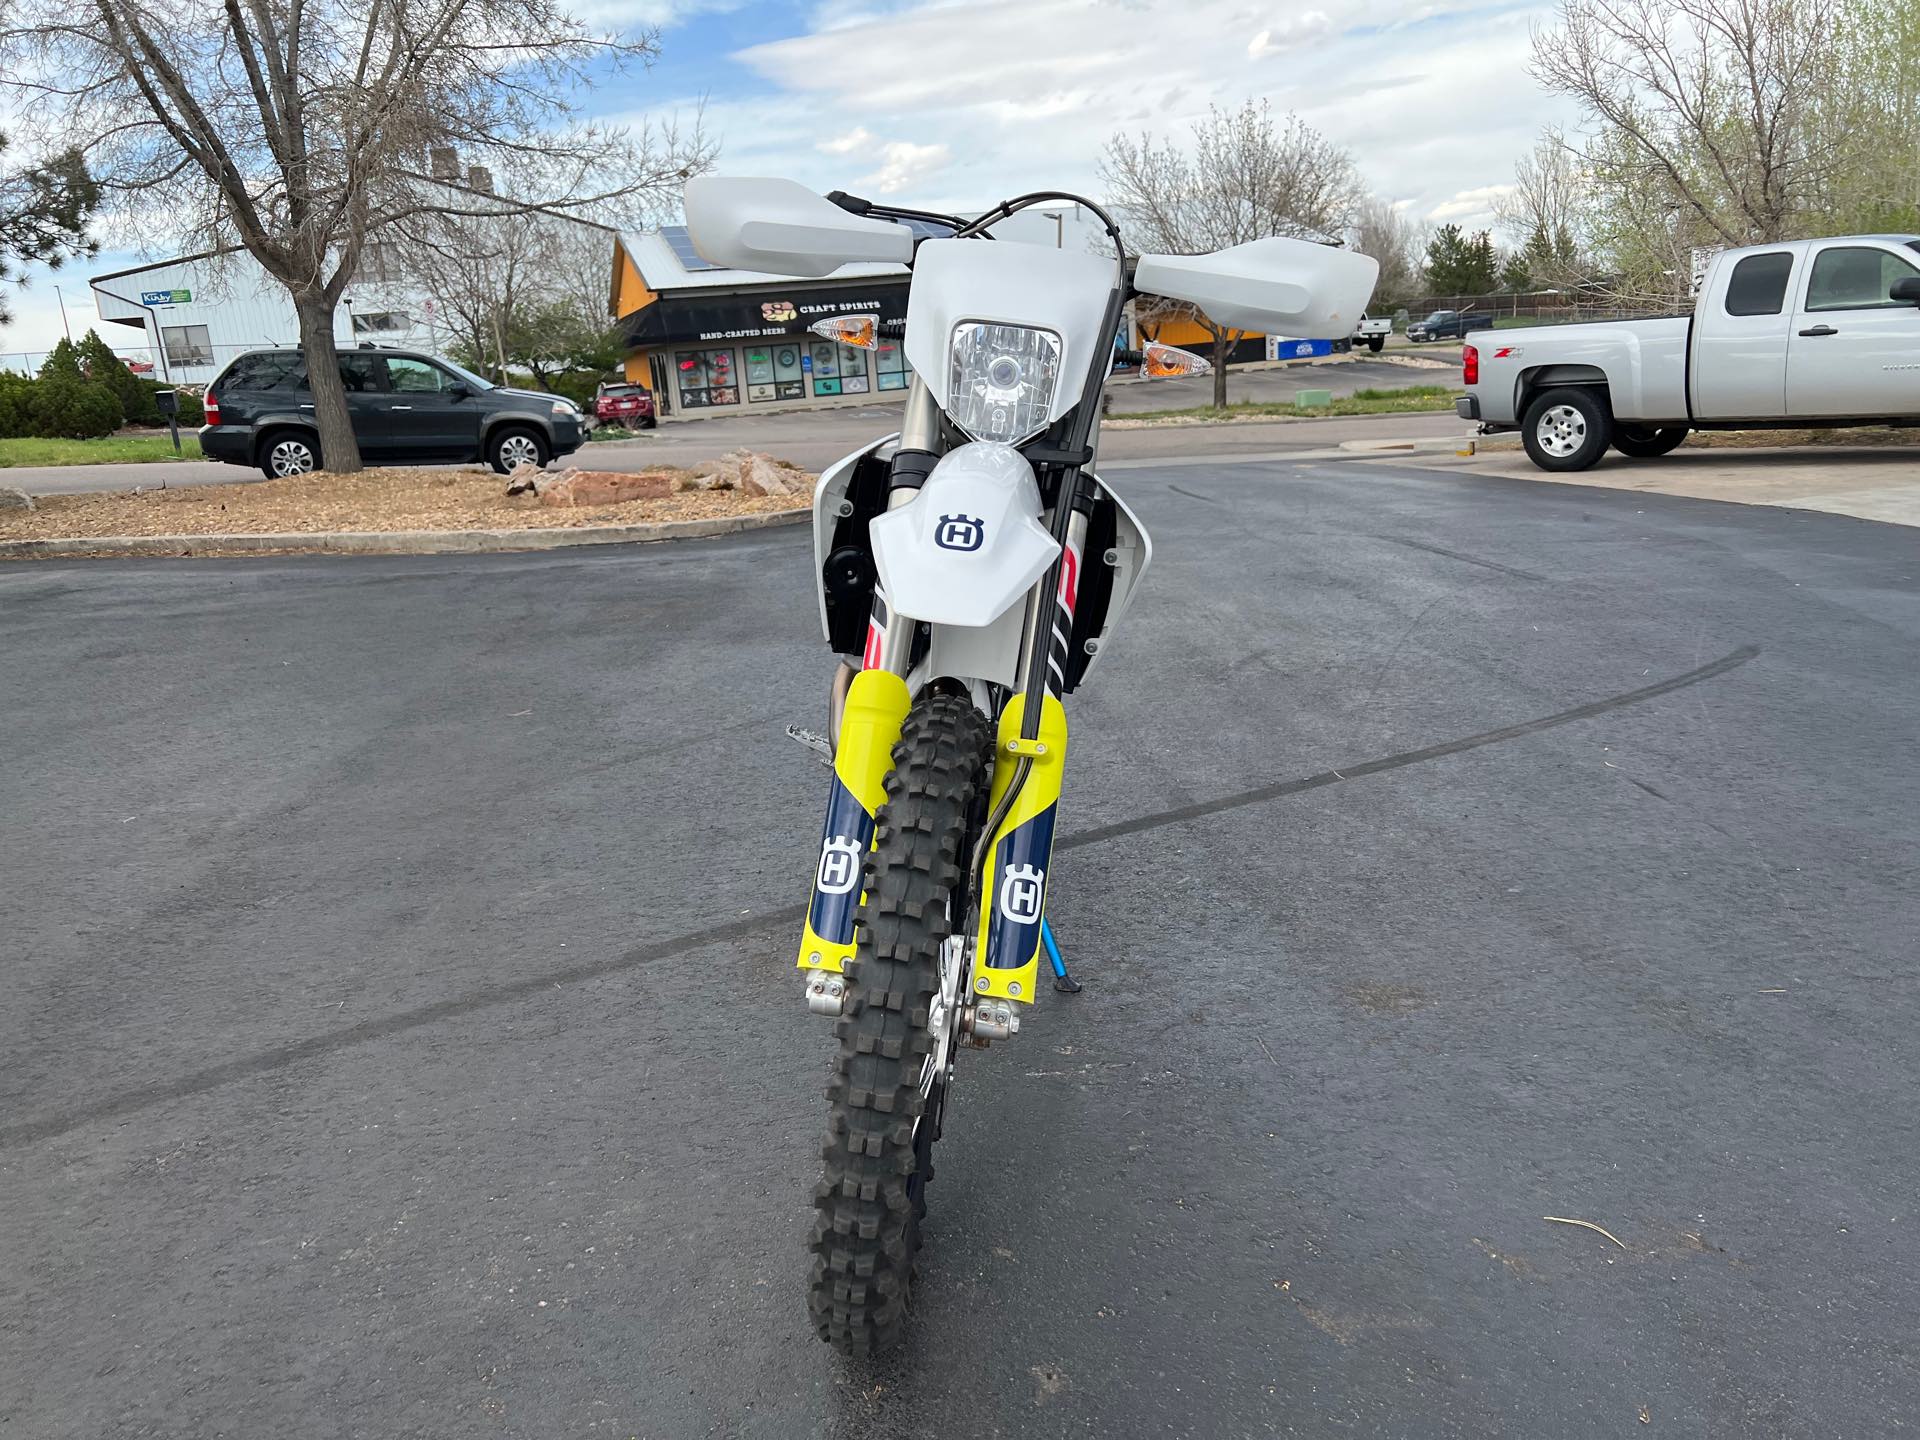 2019 Husqvarna FE 250 at Aces Motorcycles - Fort Collins